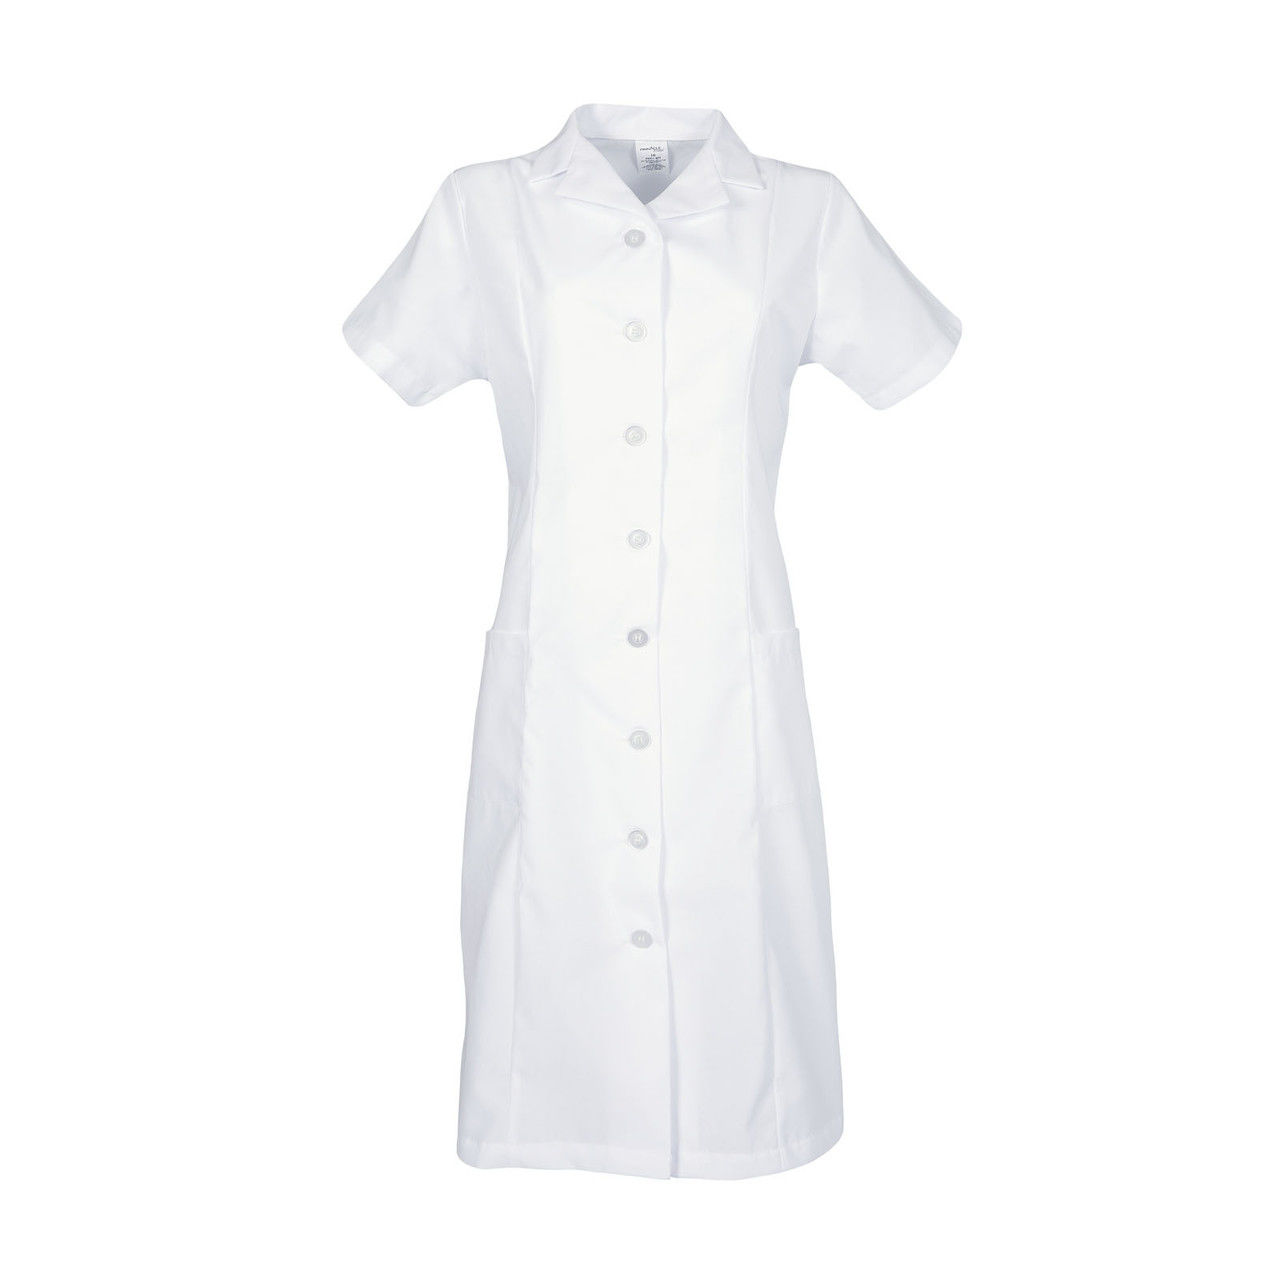 Does the white uniform dress ship from overseas?